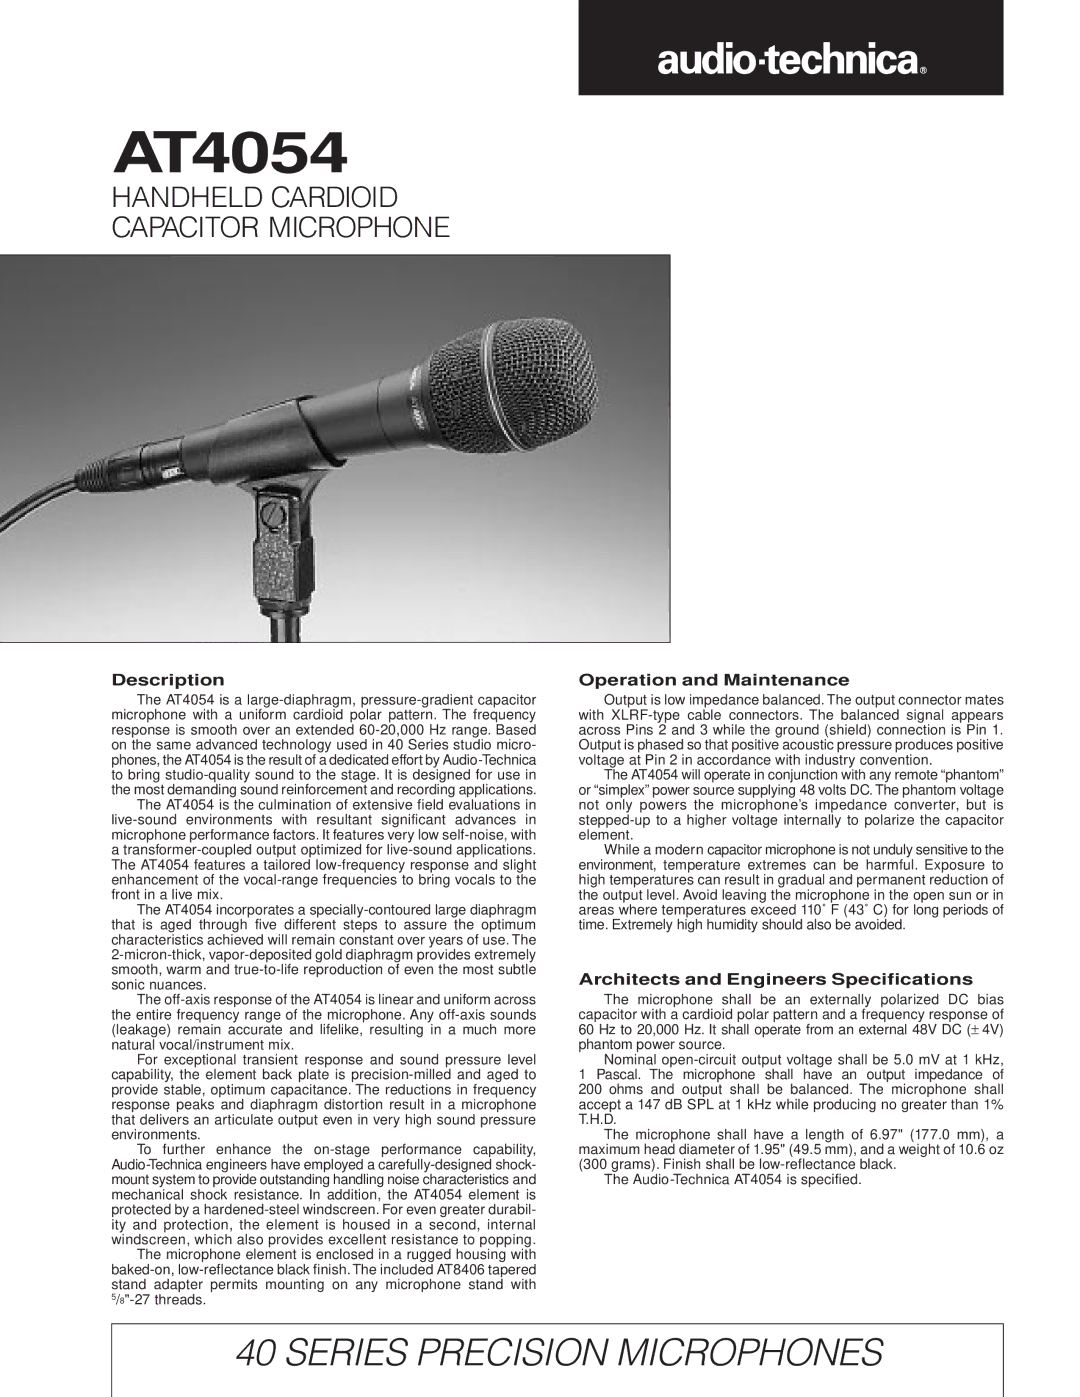 Audio-Technica AT4054 specifications Description, Operation and Maintenance, Architects and Engineers Specifications 